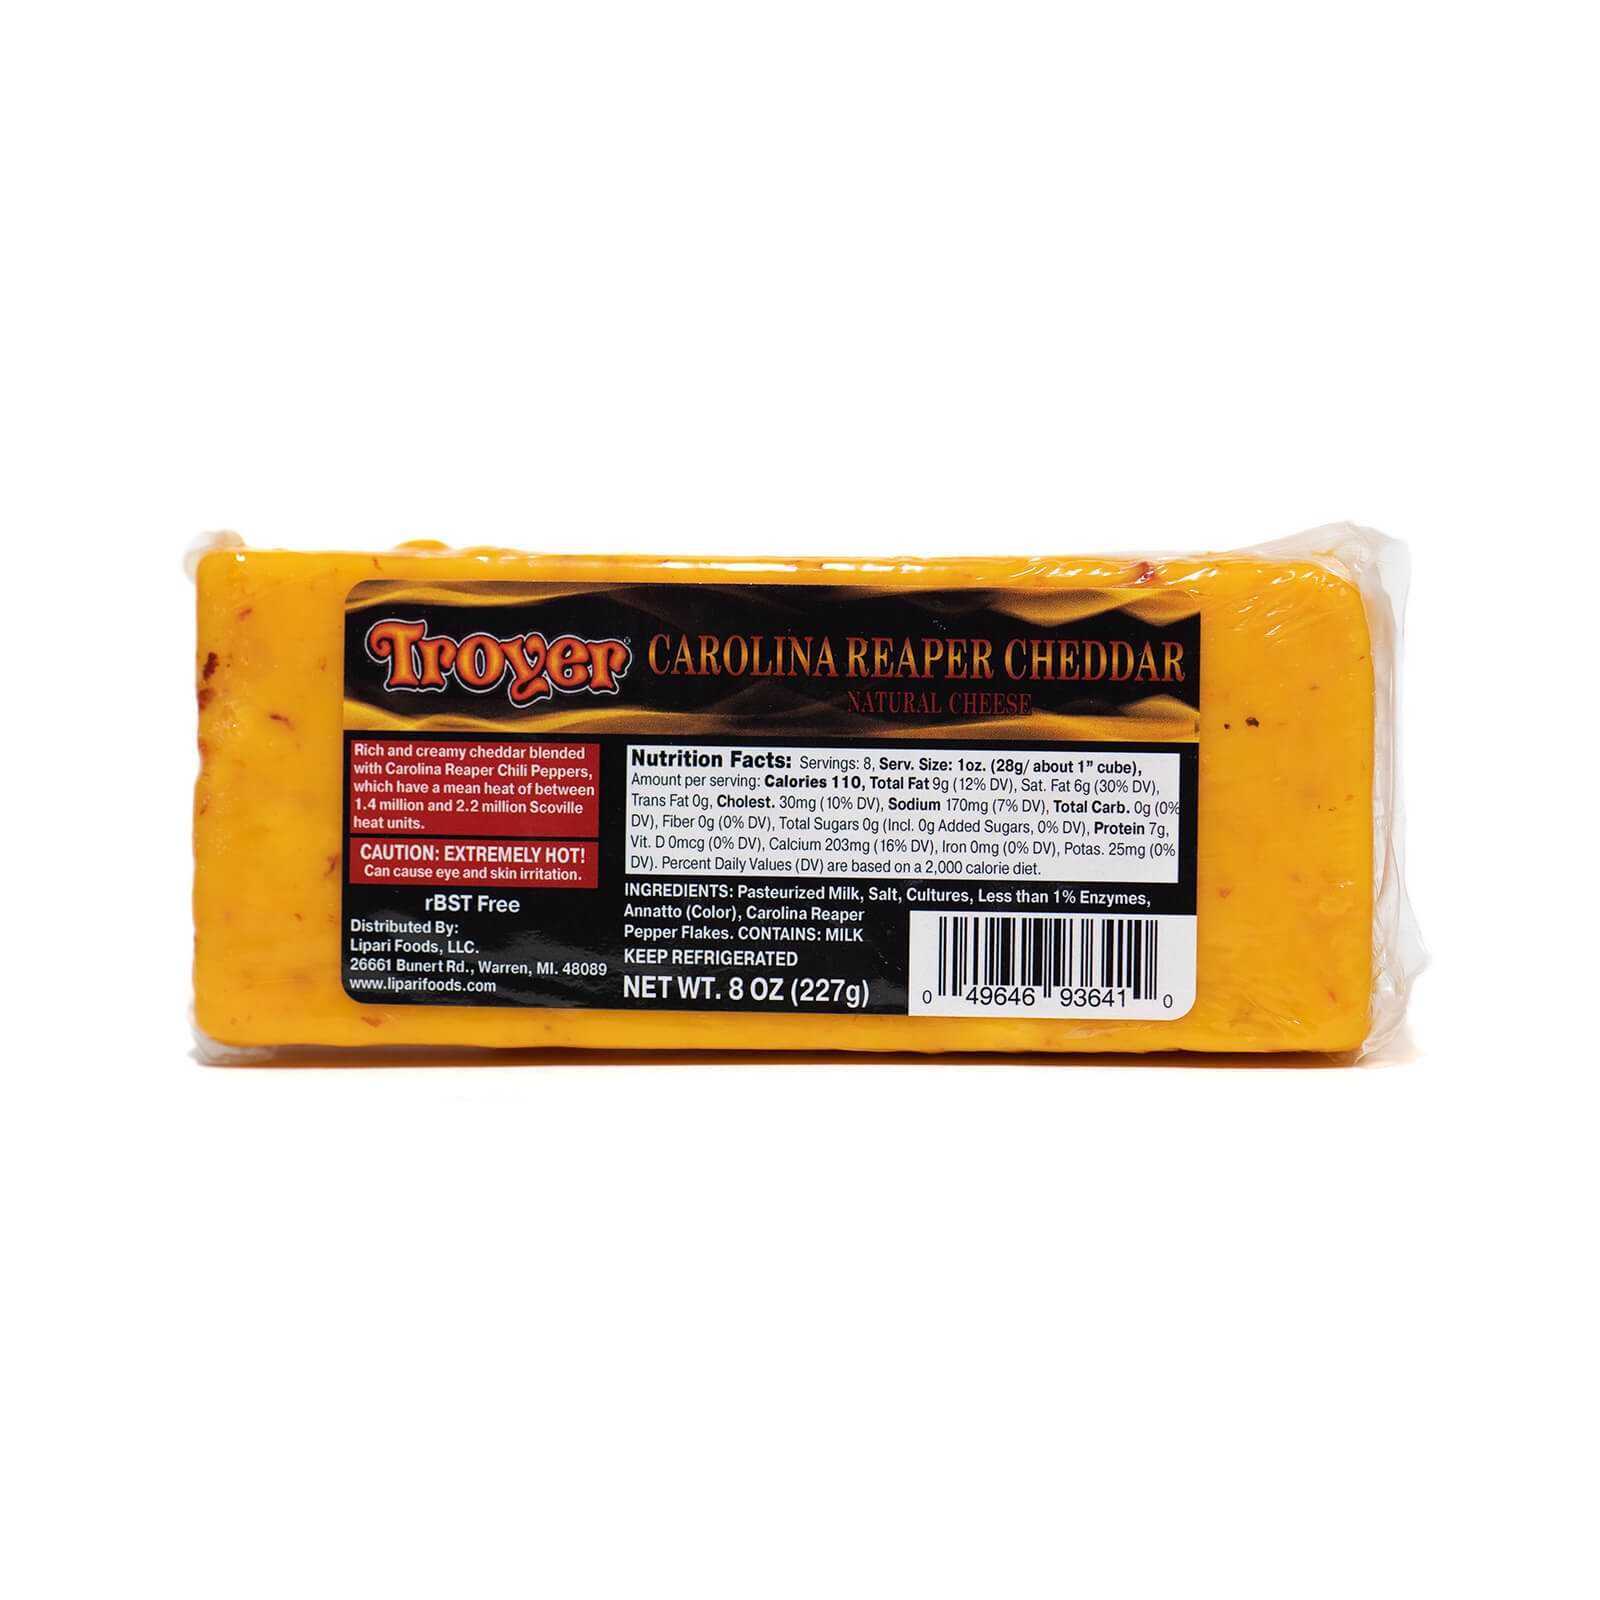 Carolina Reaper Cheddar Cheese - Troyer - 8oz w/ Nutrition Facts